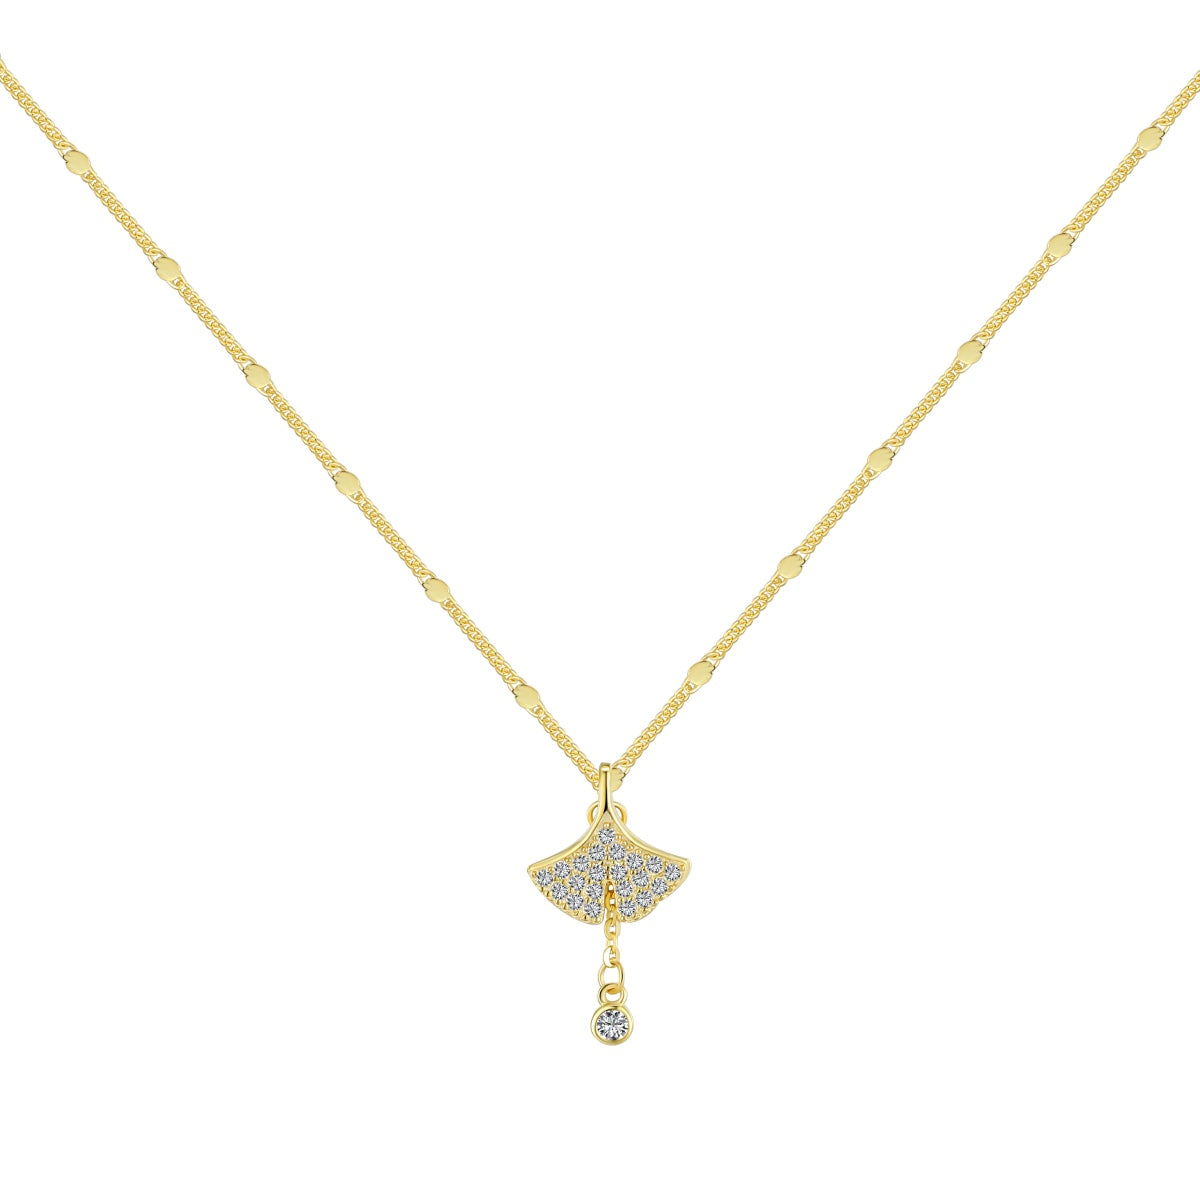 Daily Necklace - سلسال